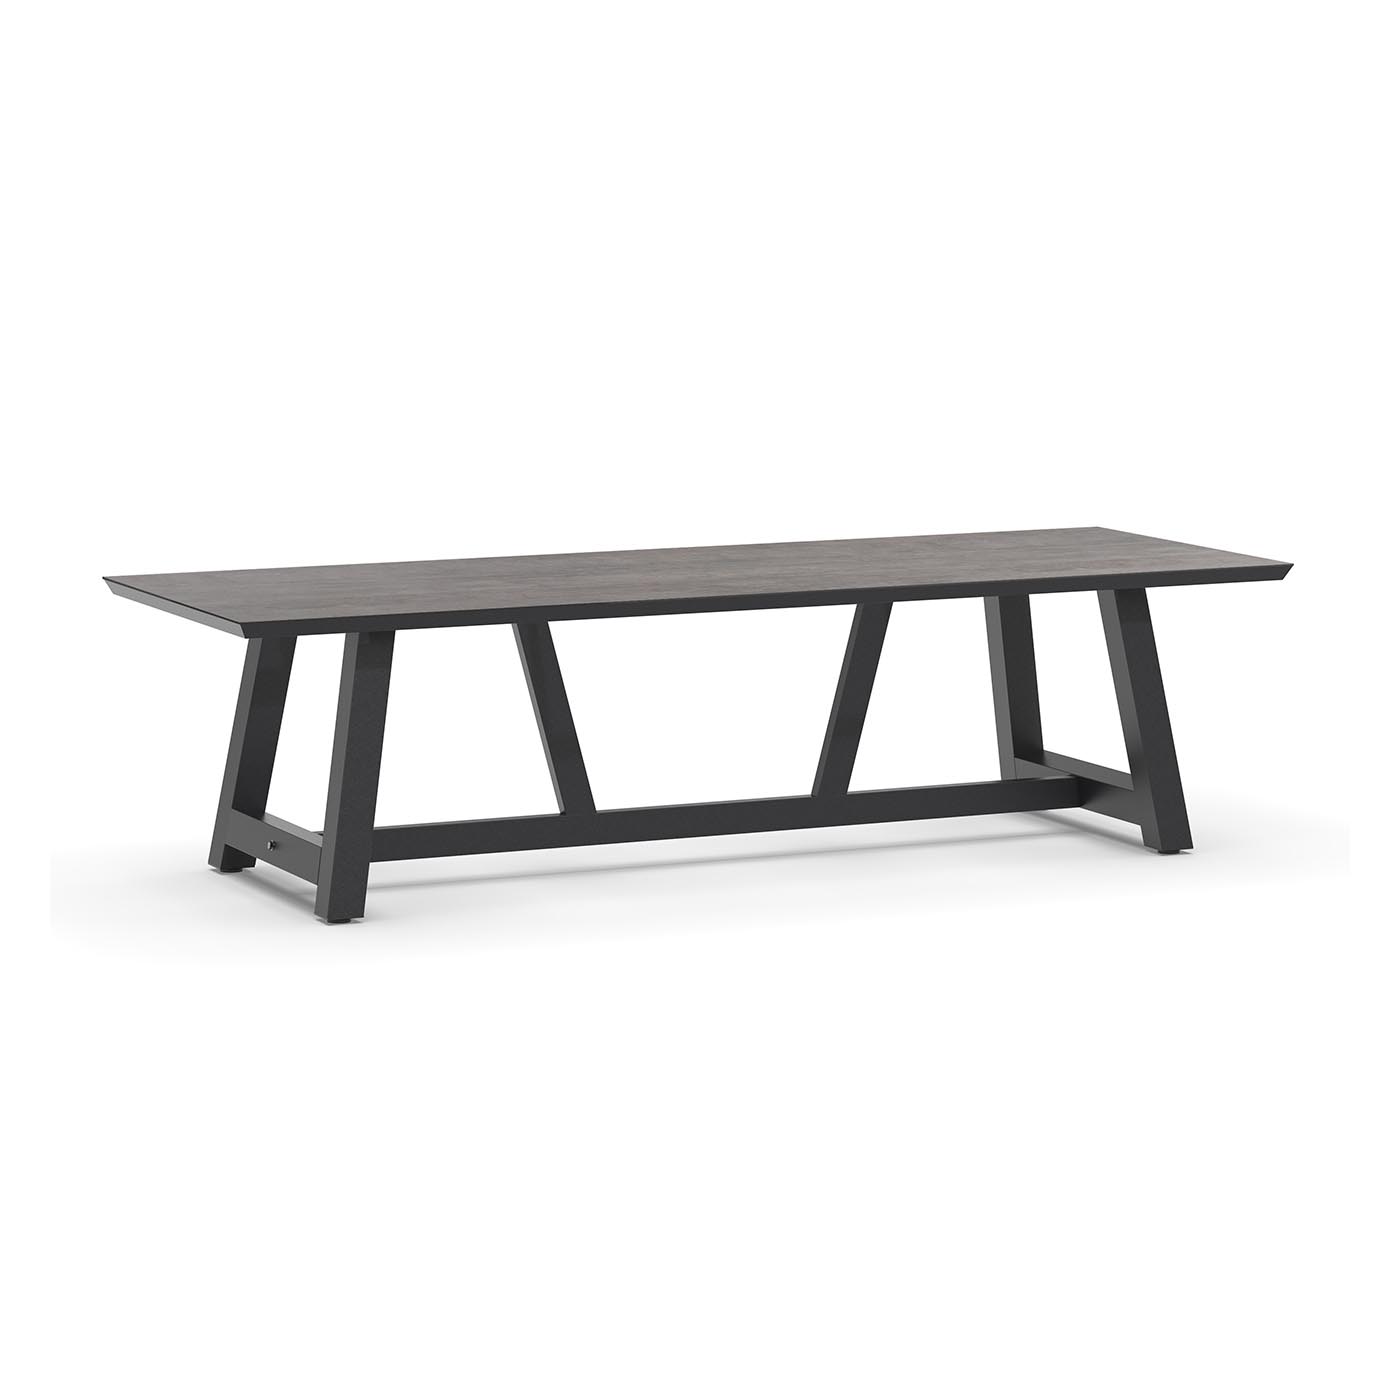 Ozon Dining Table Trespa Forest Grey 280 x 100 cm Charcoal